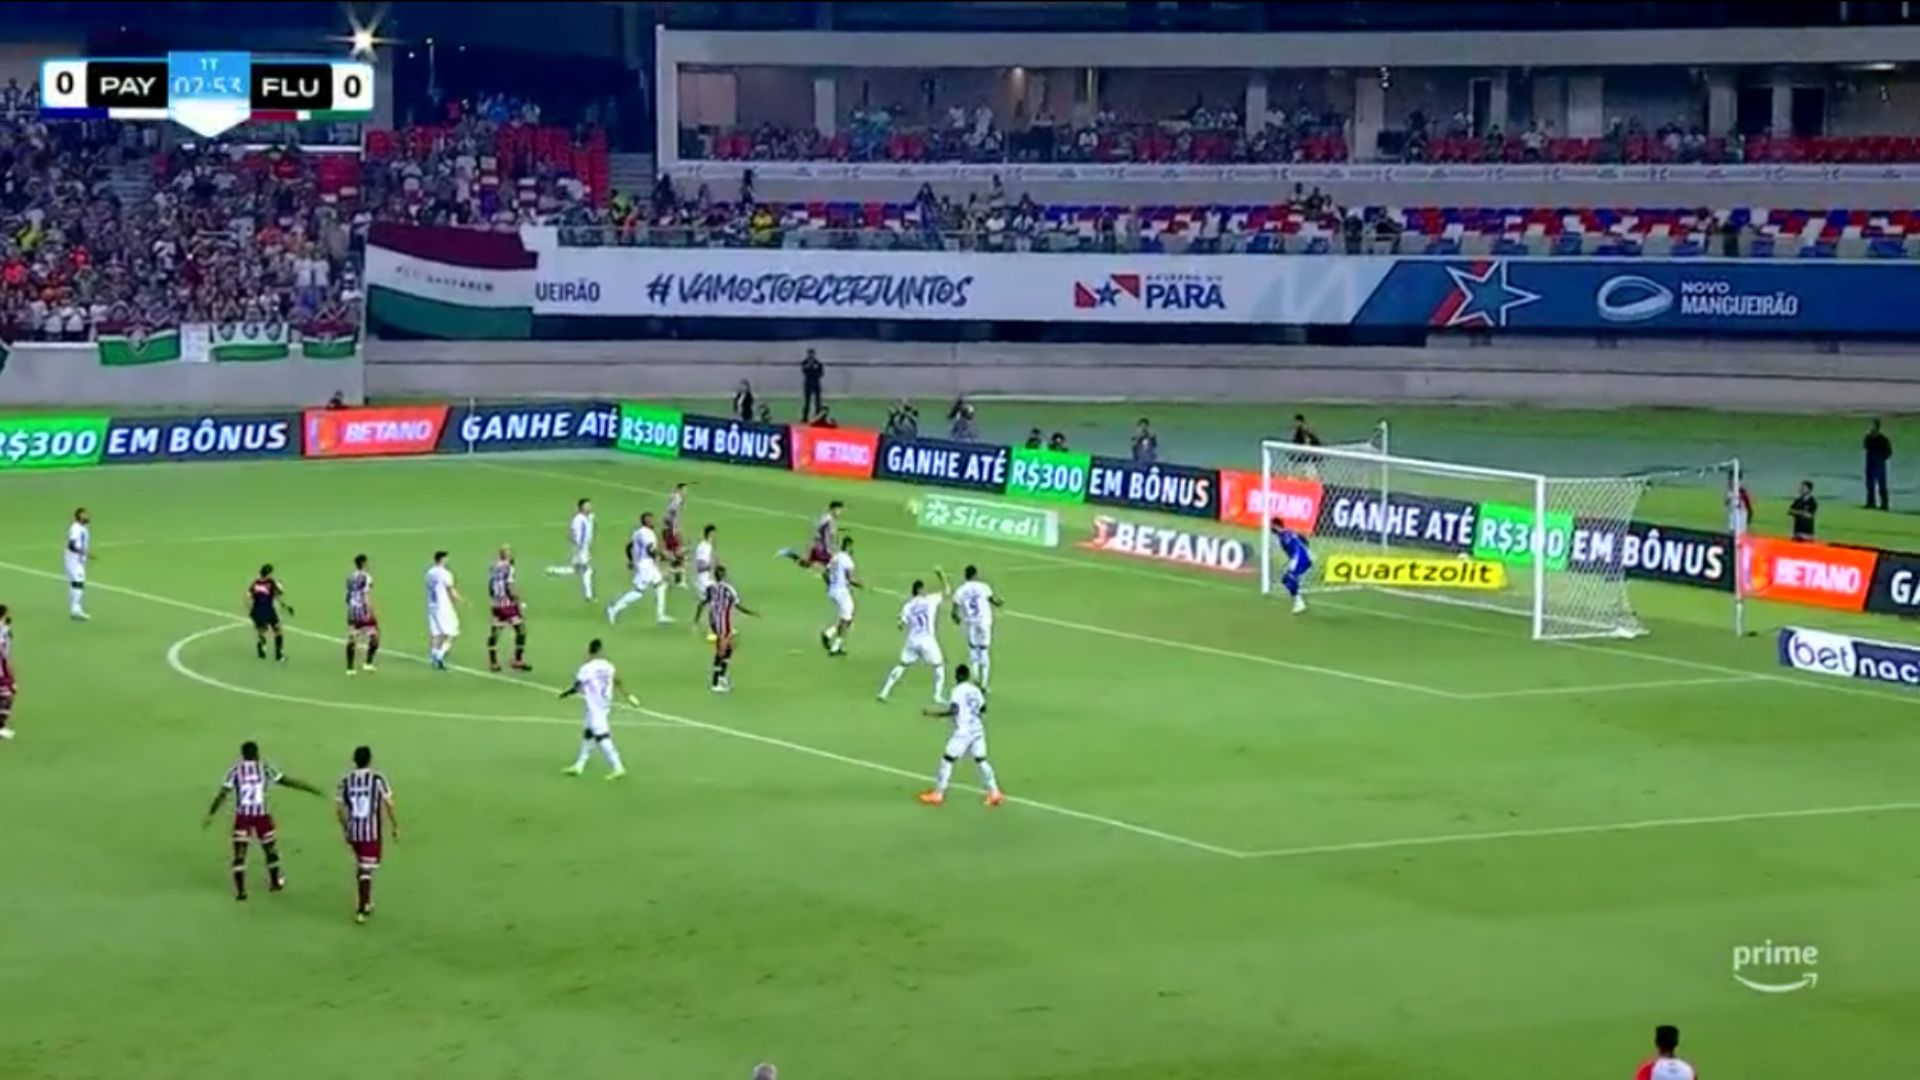 Moment of Fluminense's first goal in the game